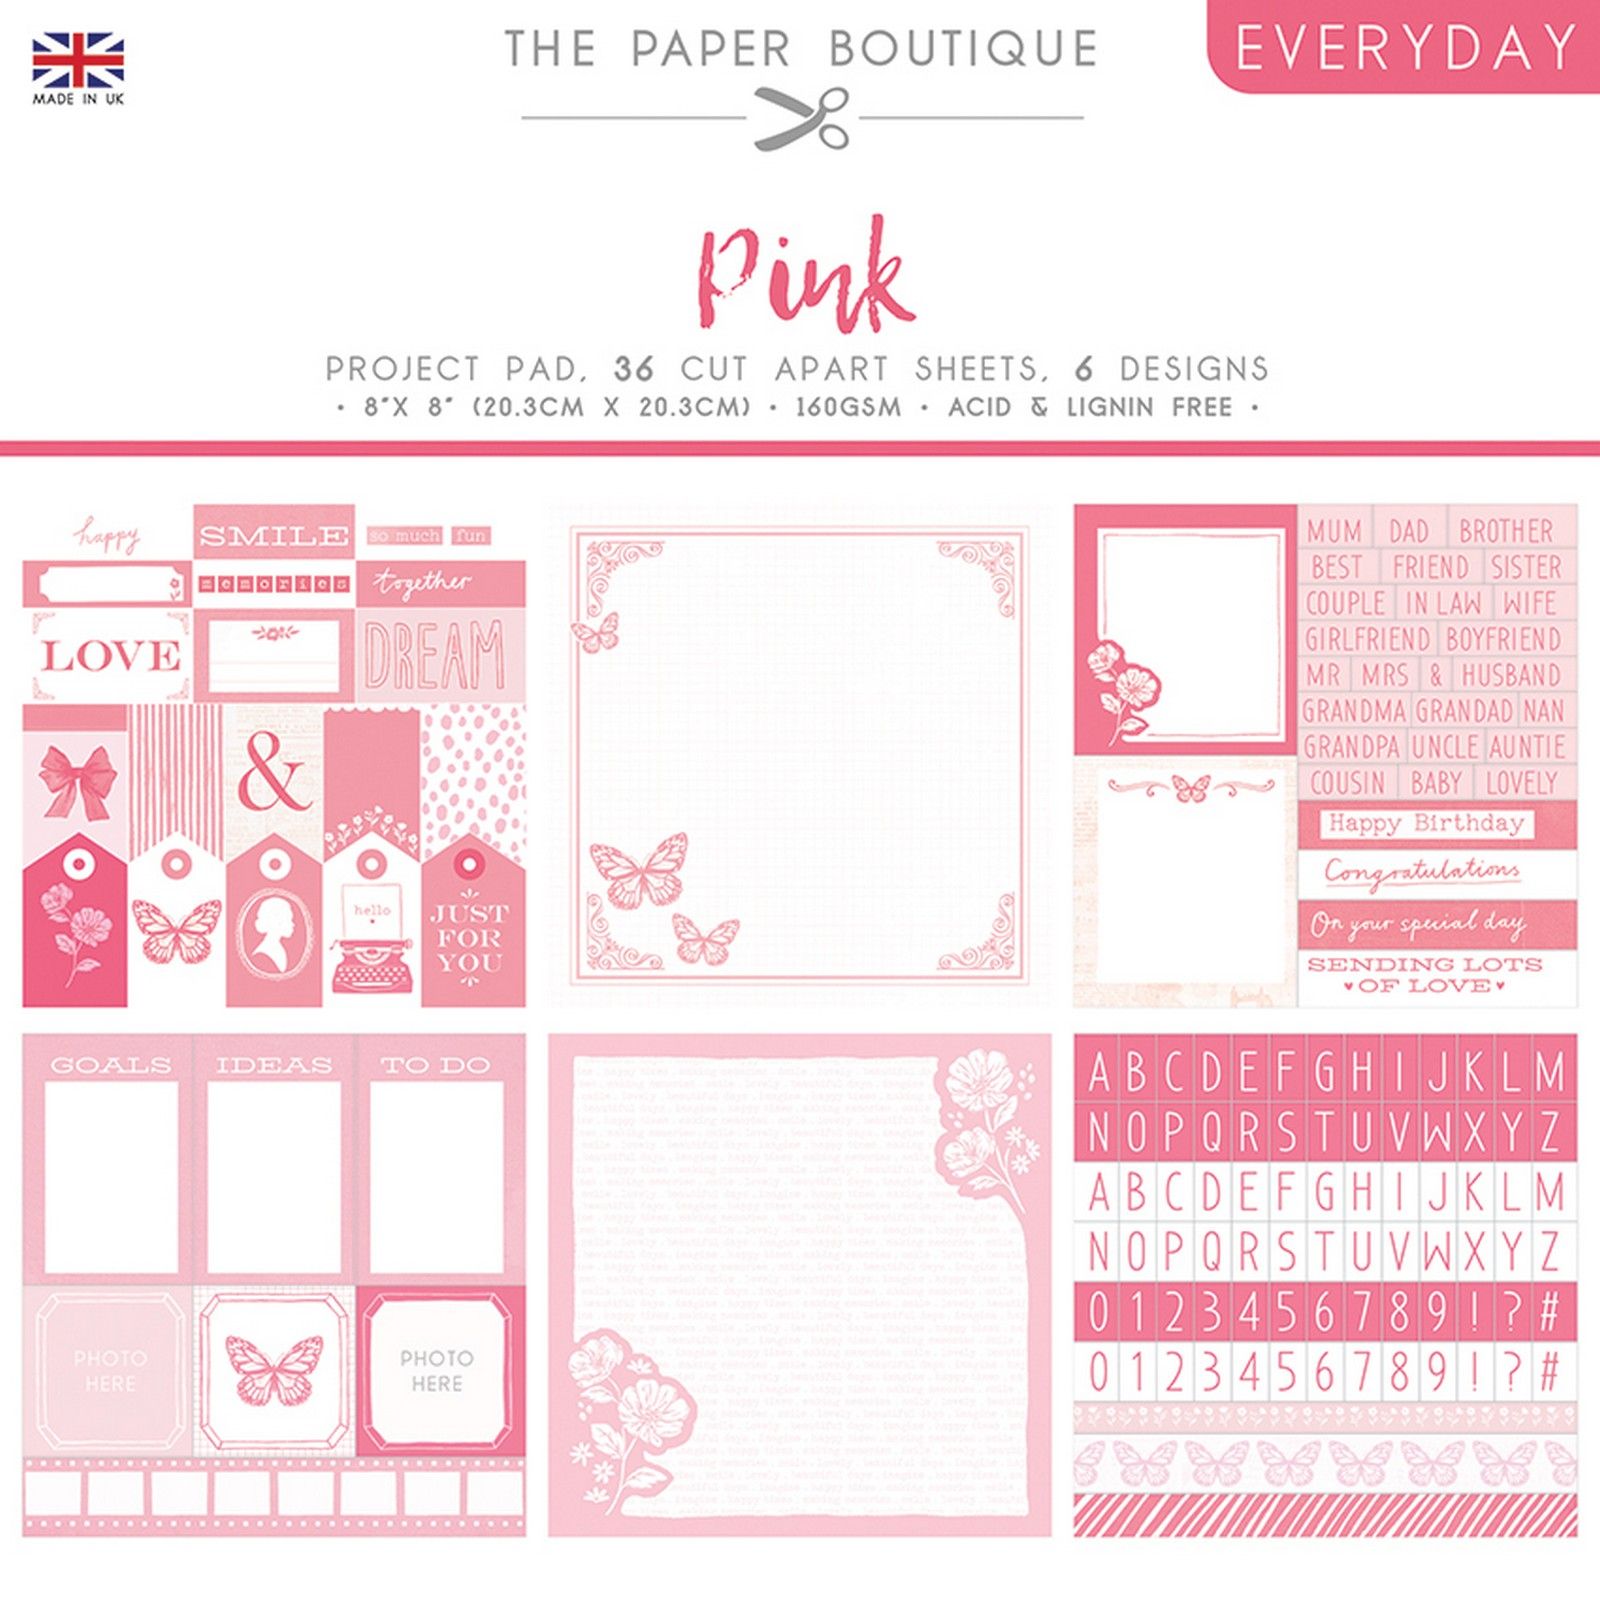 The Paper Boutique • Everyday shades of pink project pad